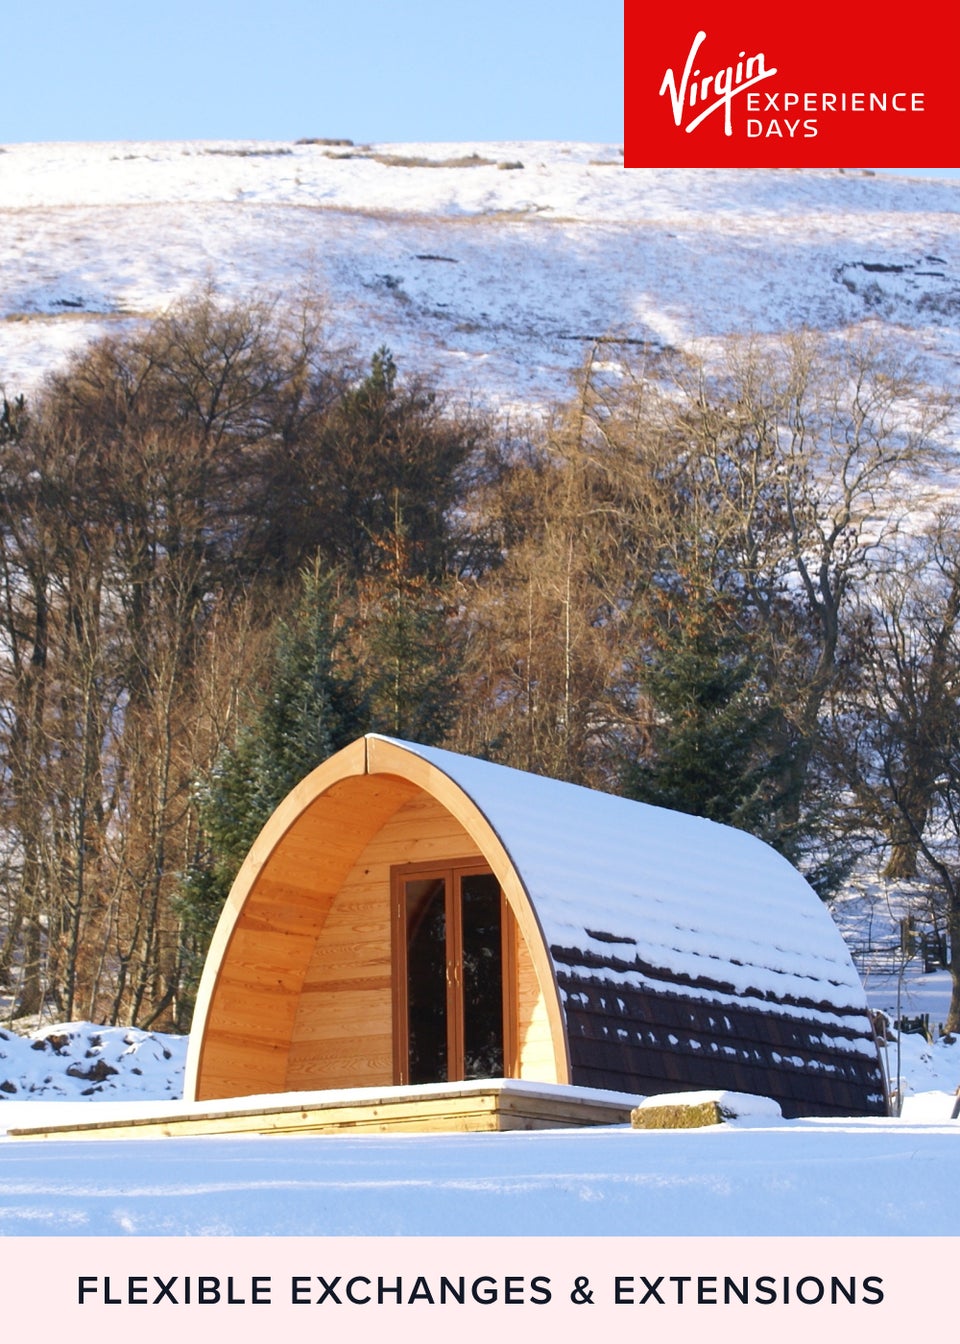 Virgin Experience Days One Night Eco Camping Pod Break at the Quiet Site, Lake District